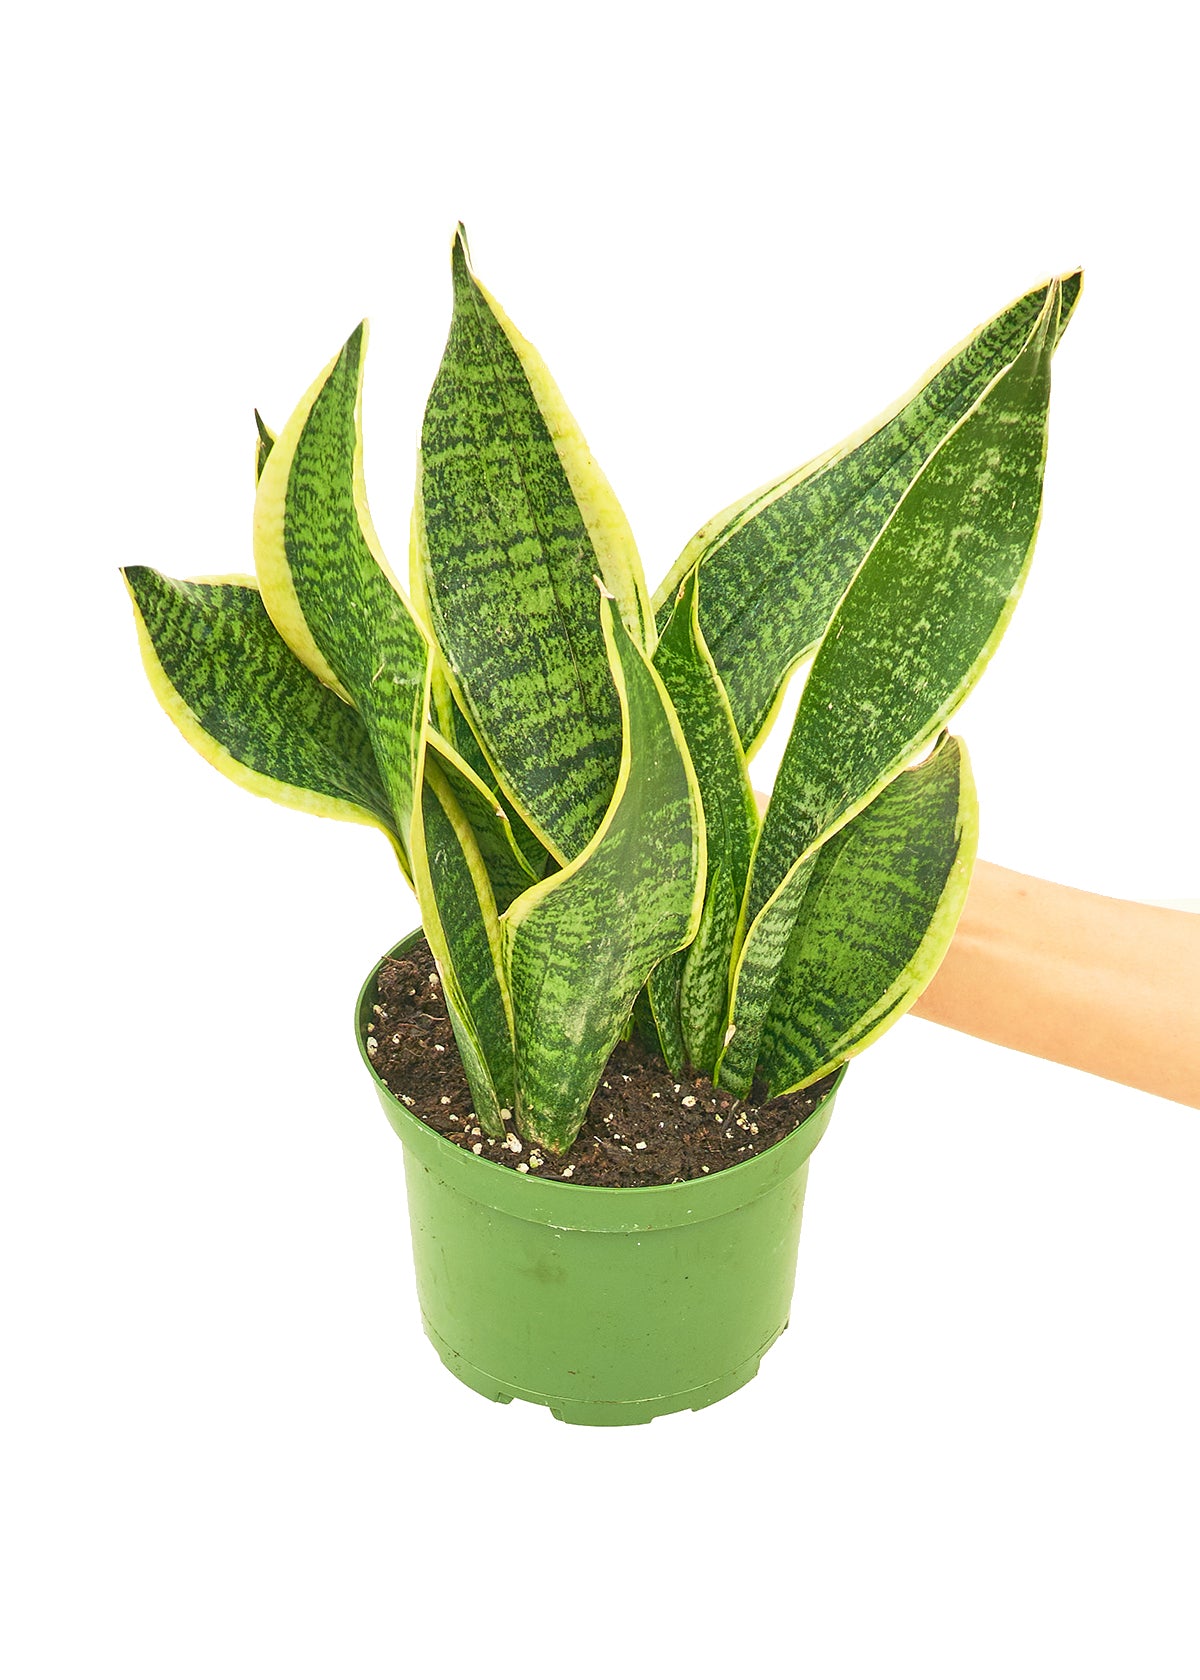 Medium size Laurentii Snake Plant in a growers pot with a white background and a hand holding the pot to show the top view